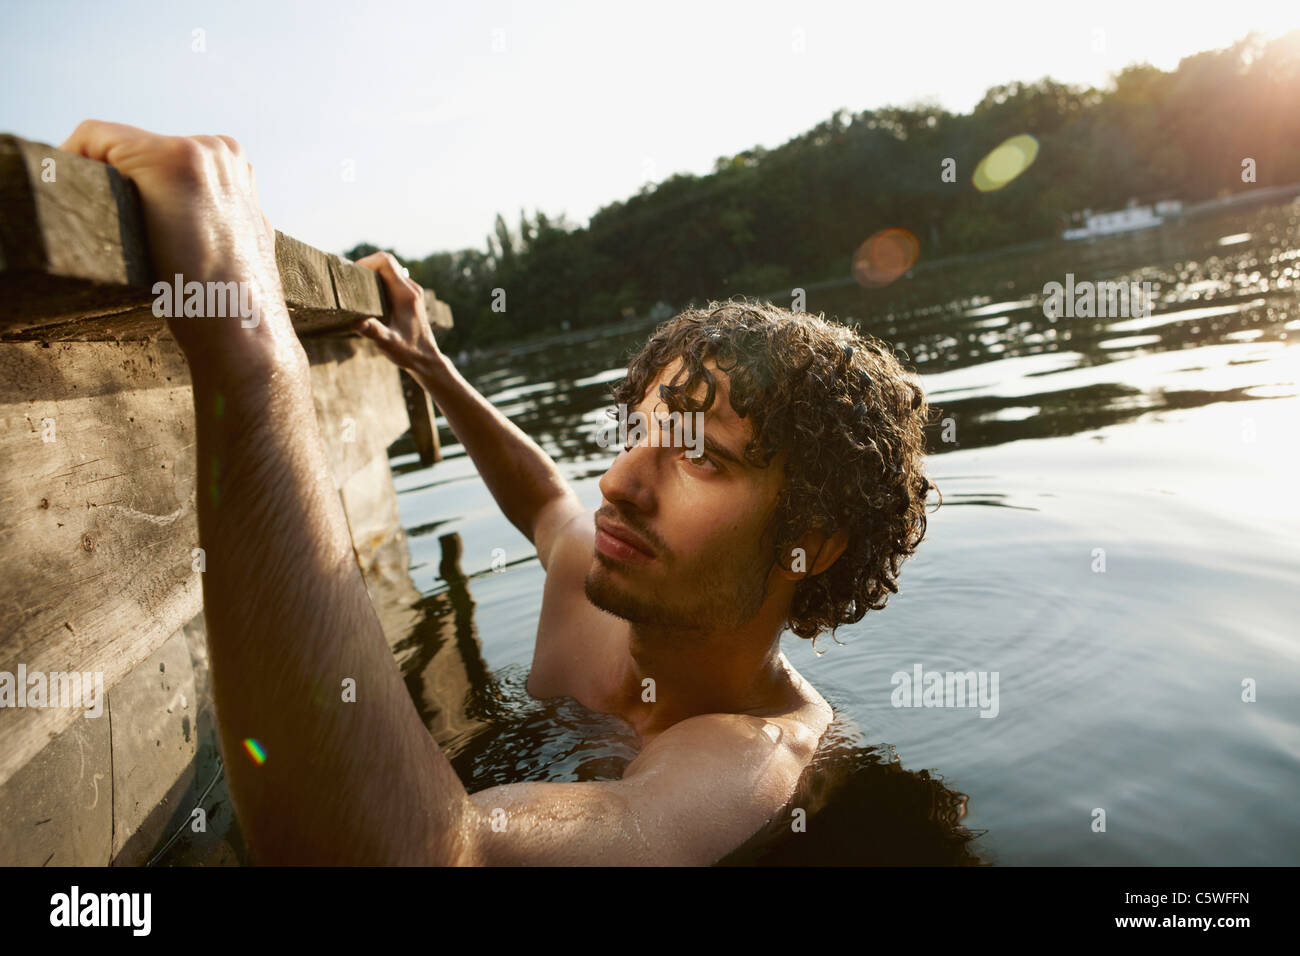 Germany, Berlin, Young man in Spree river, side view Stock Photo